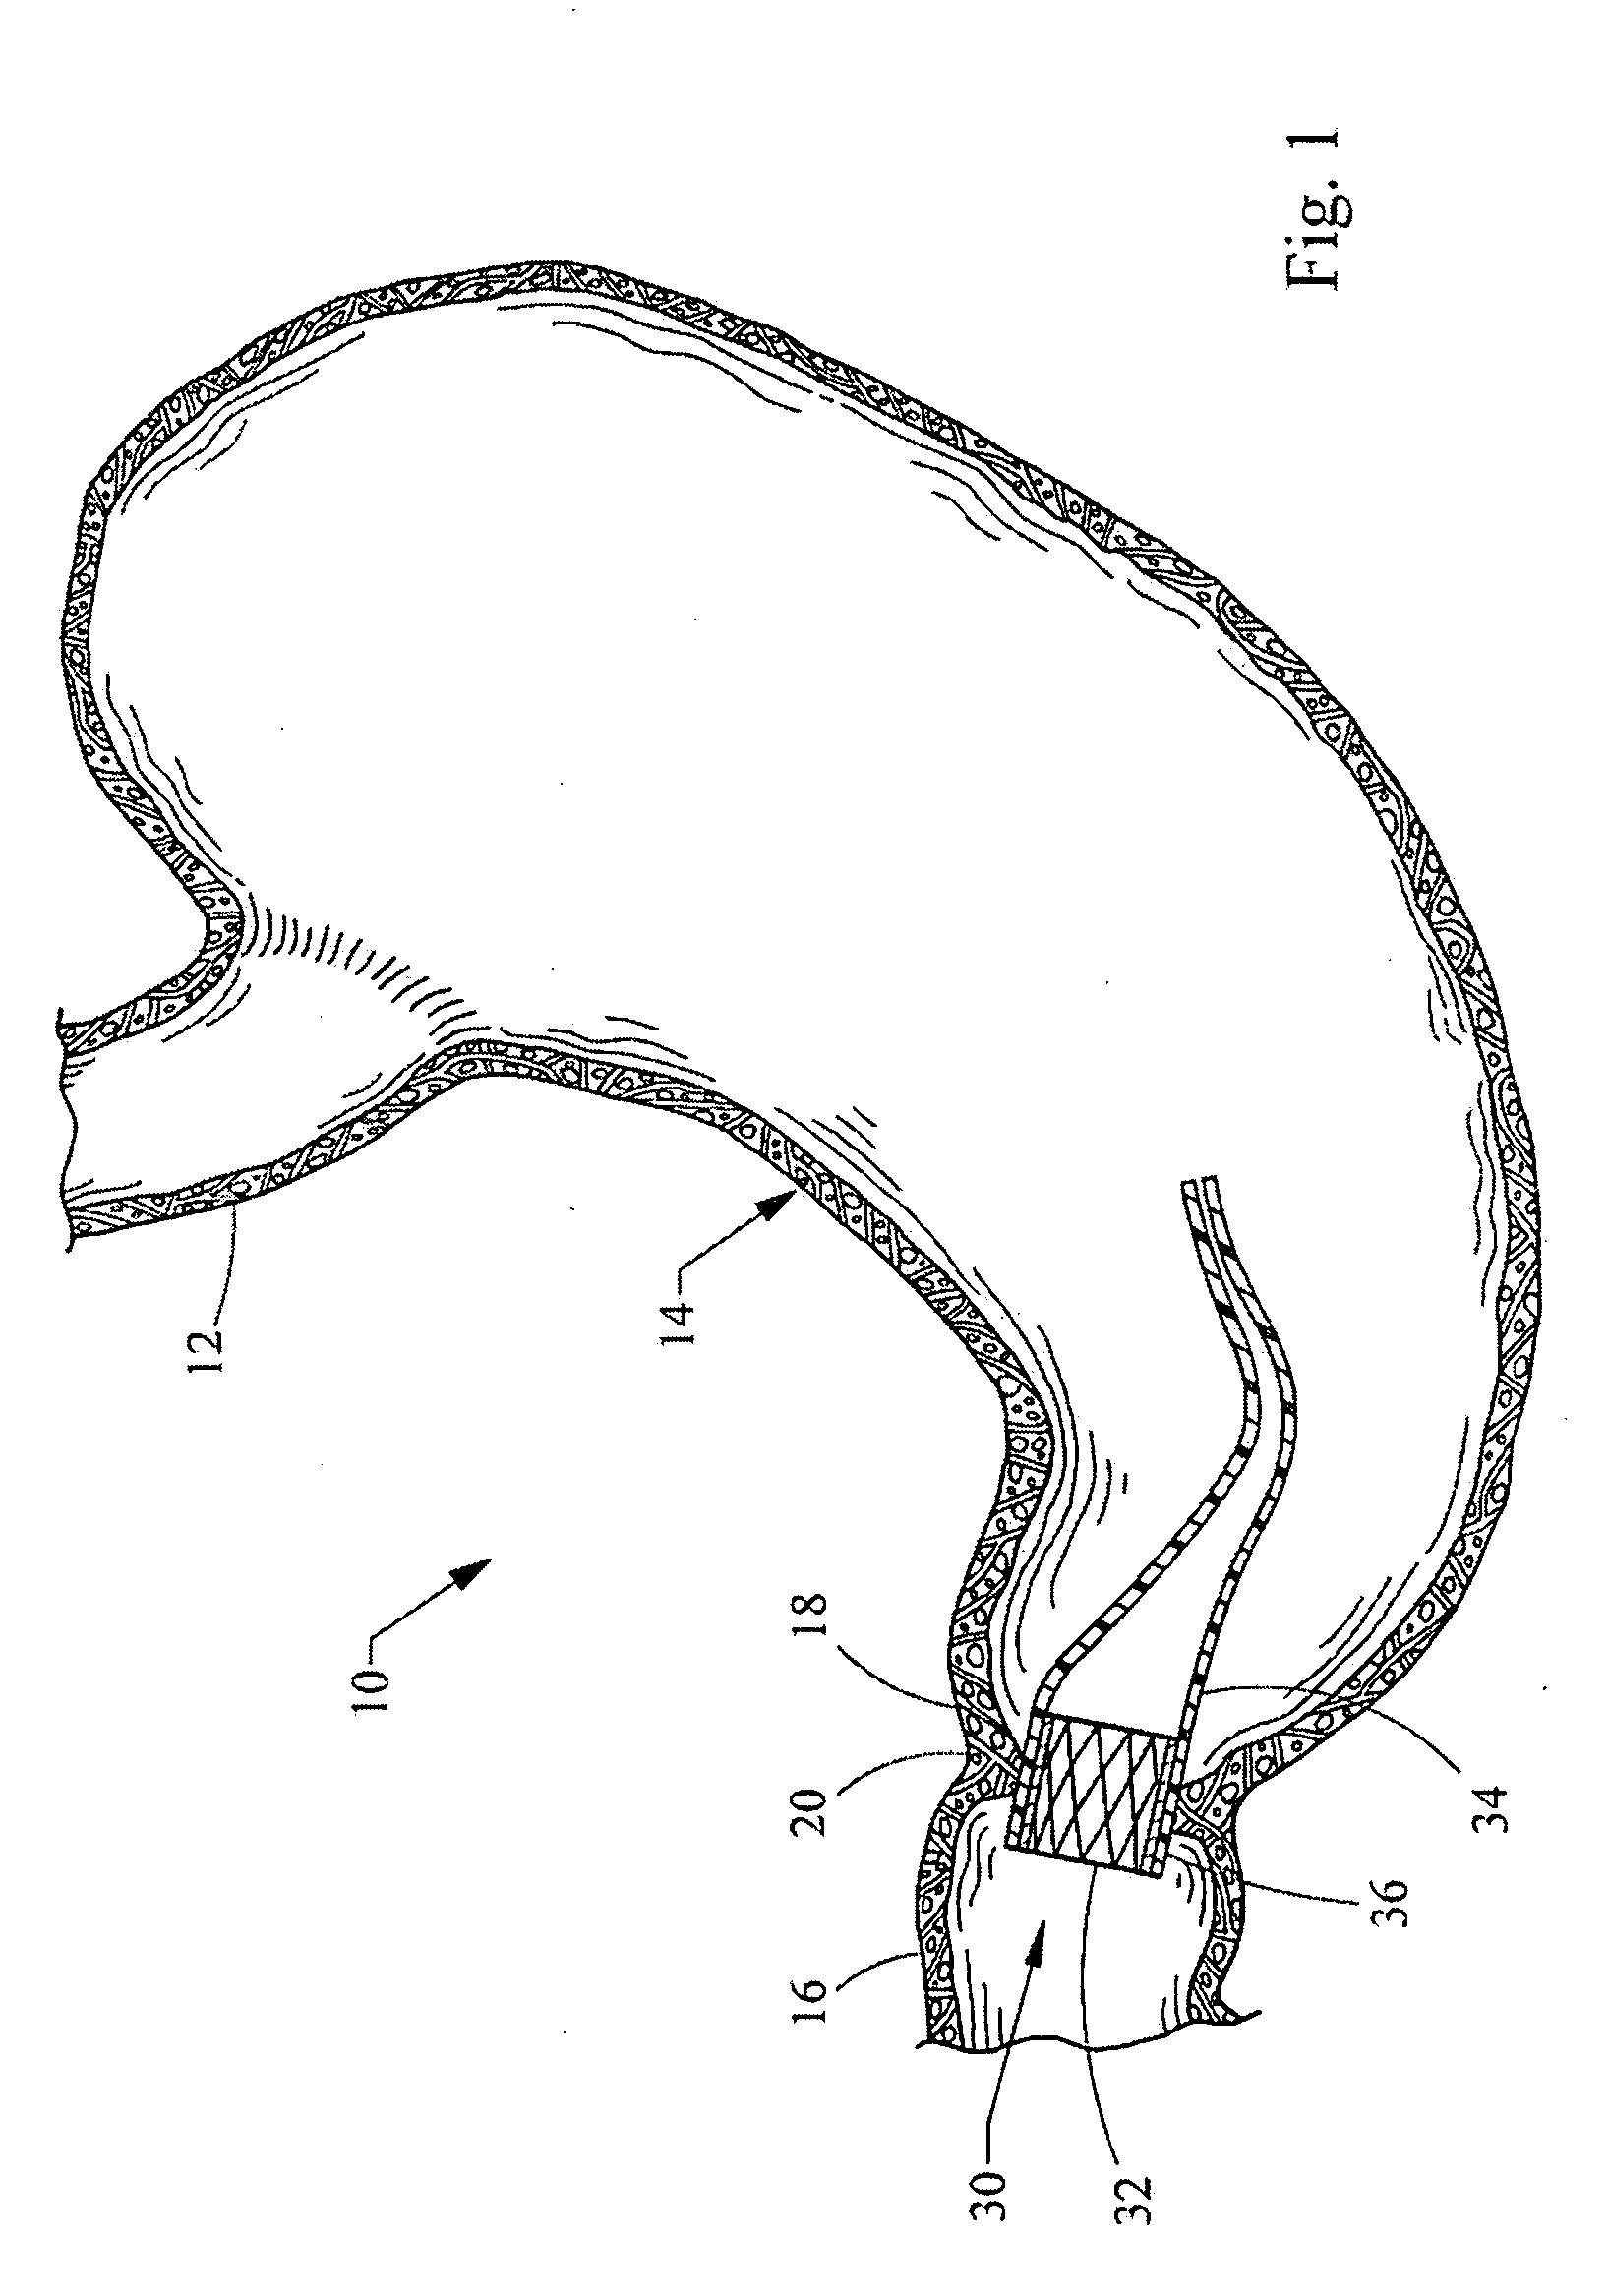 Apparatus and methods for delaying gastric emptying to treat obesity